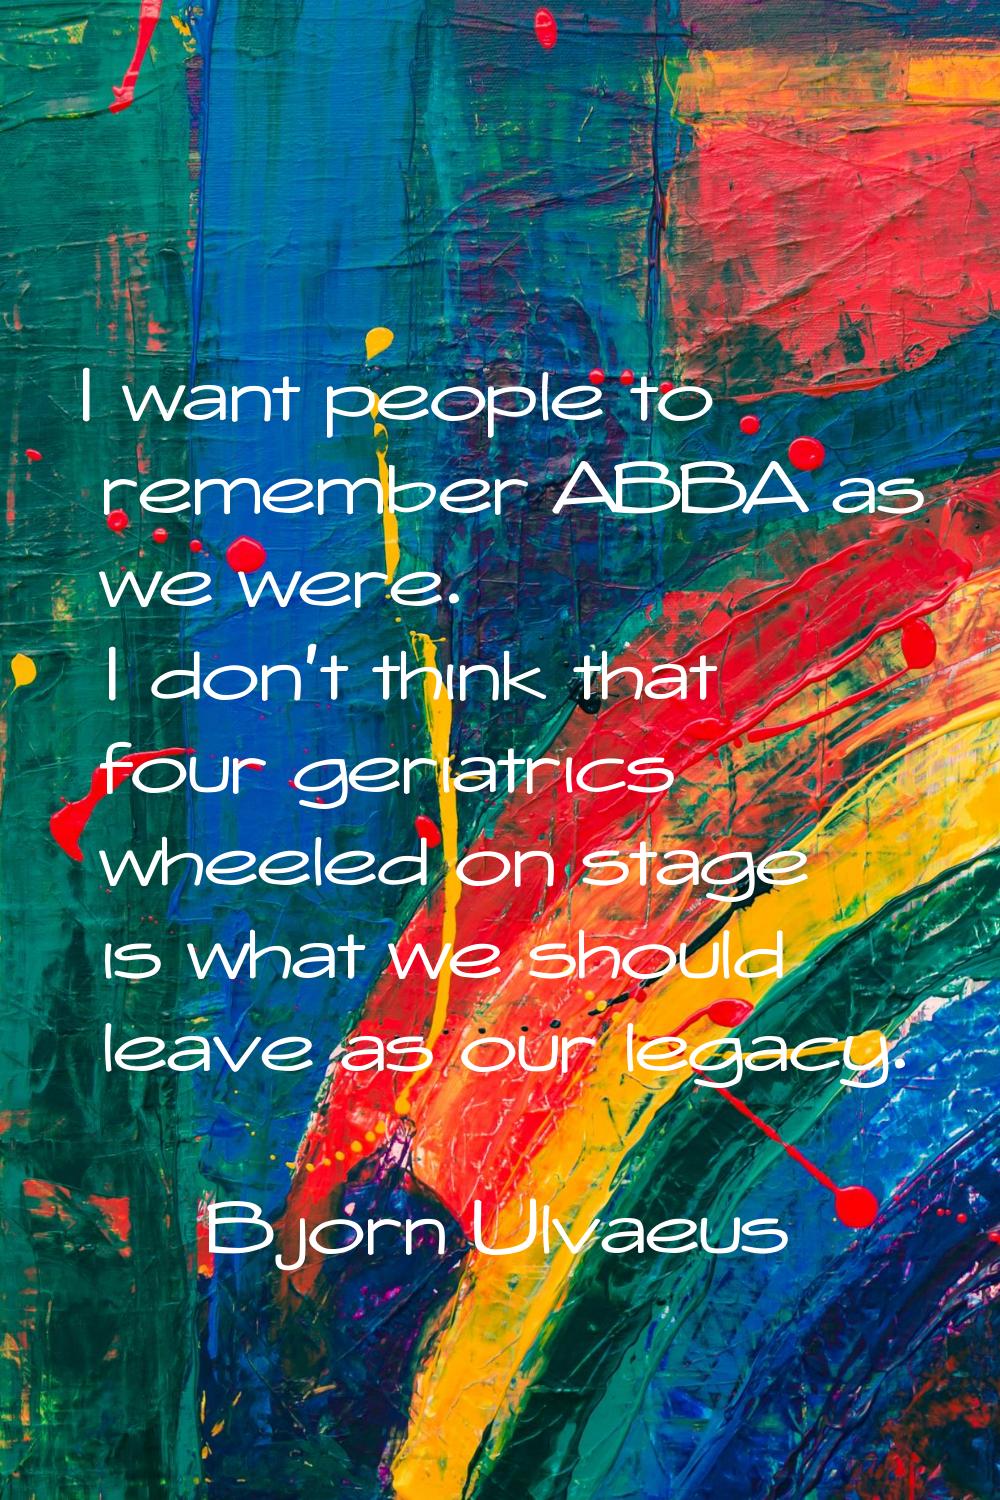 I want people to remember ABBA as we were. I don't think that four geriatrics wheeled on stage is w